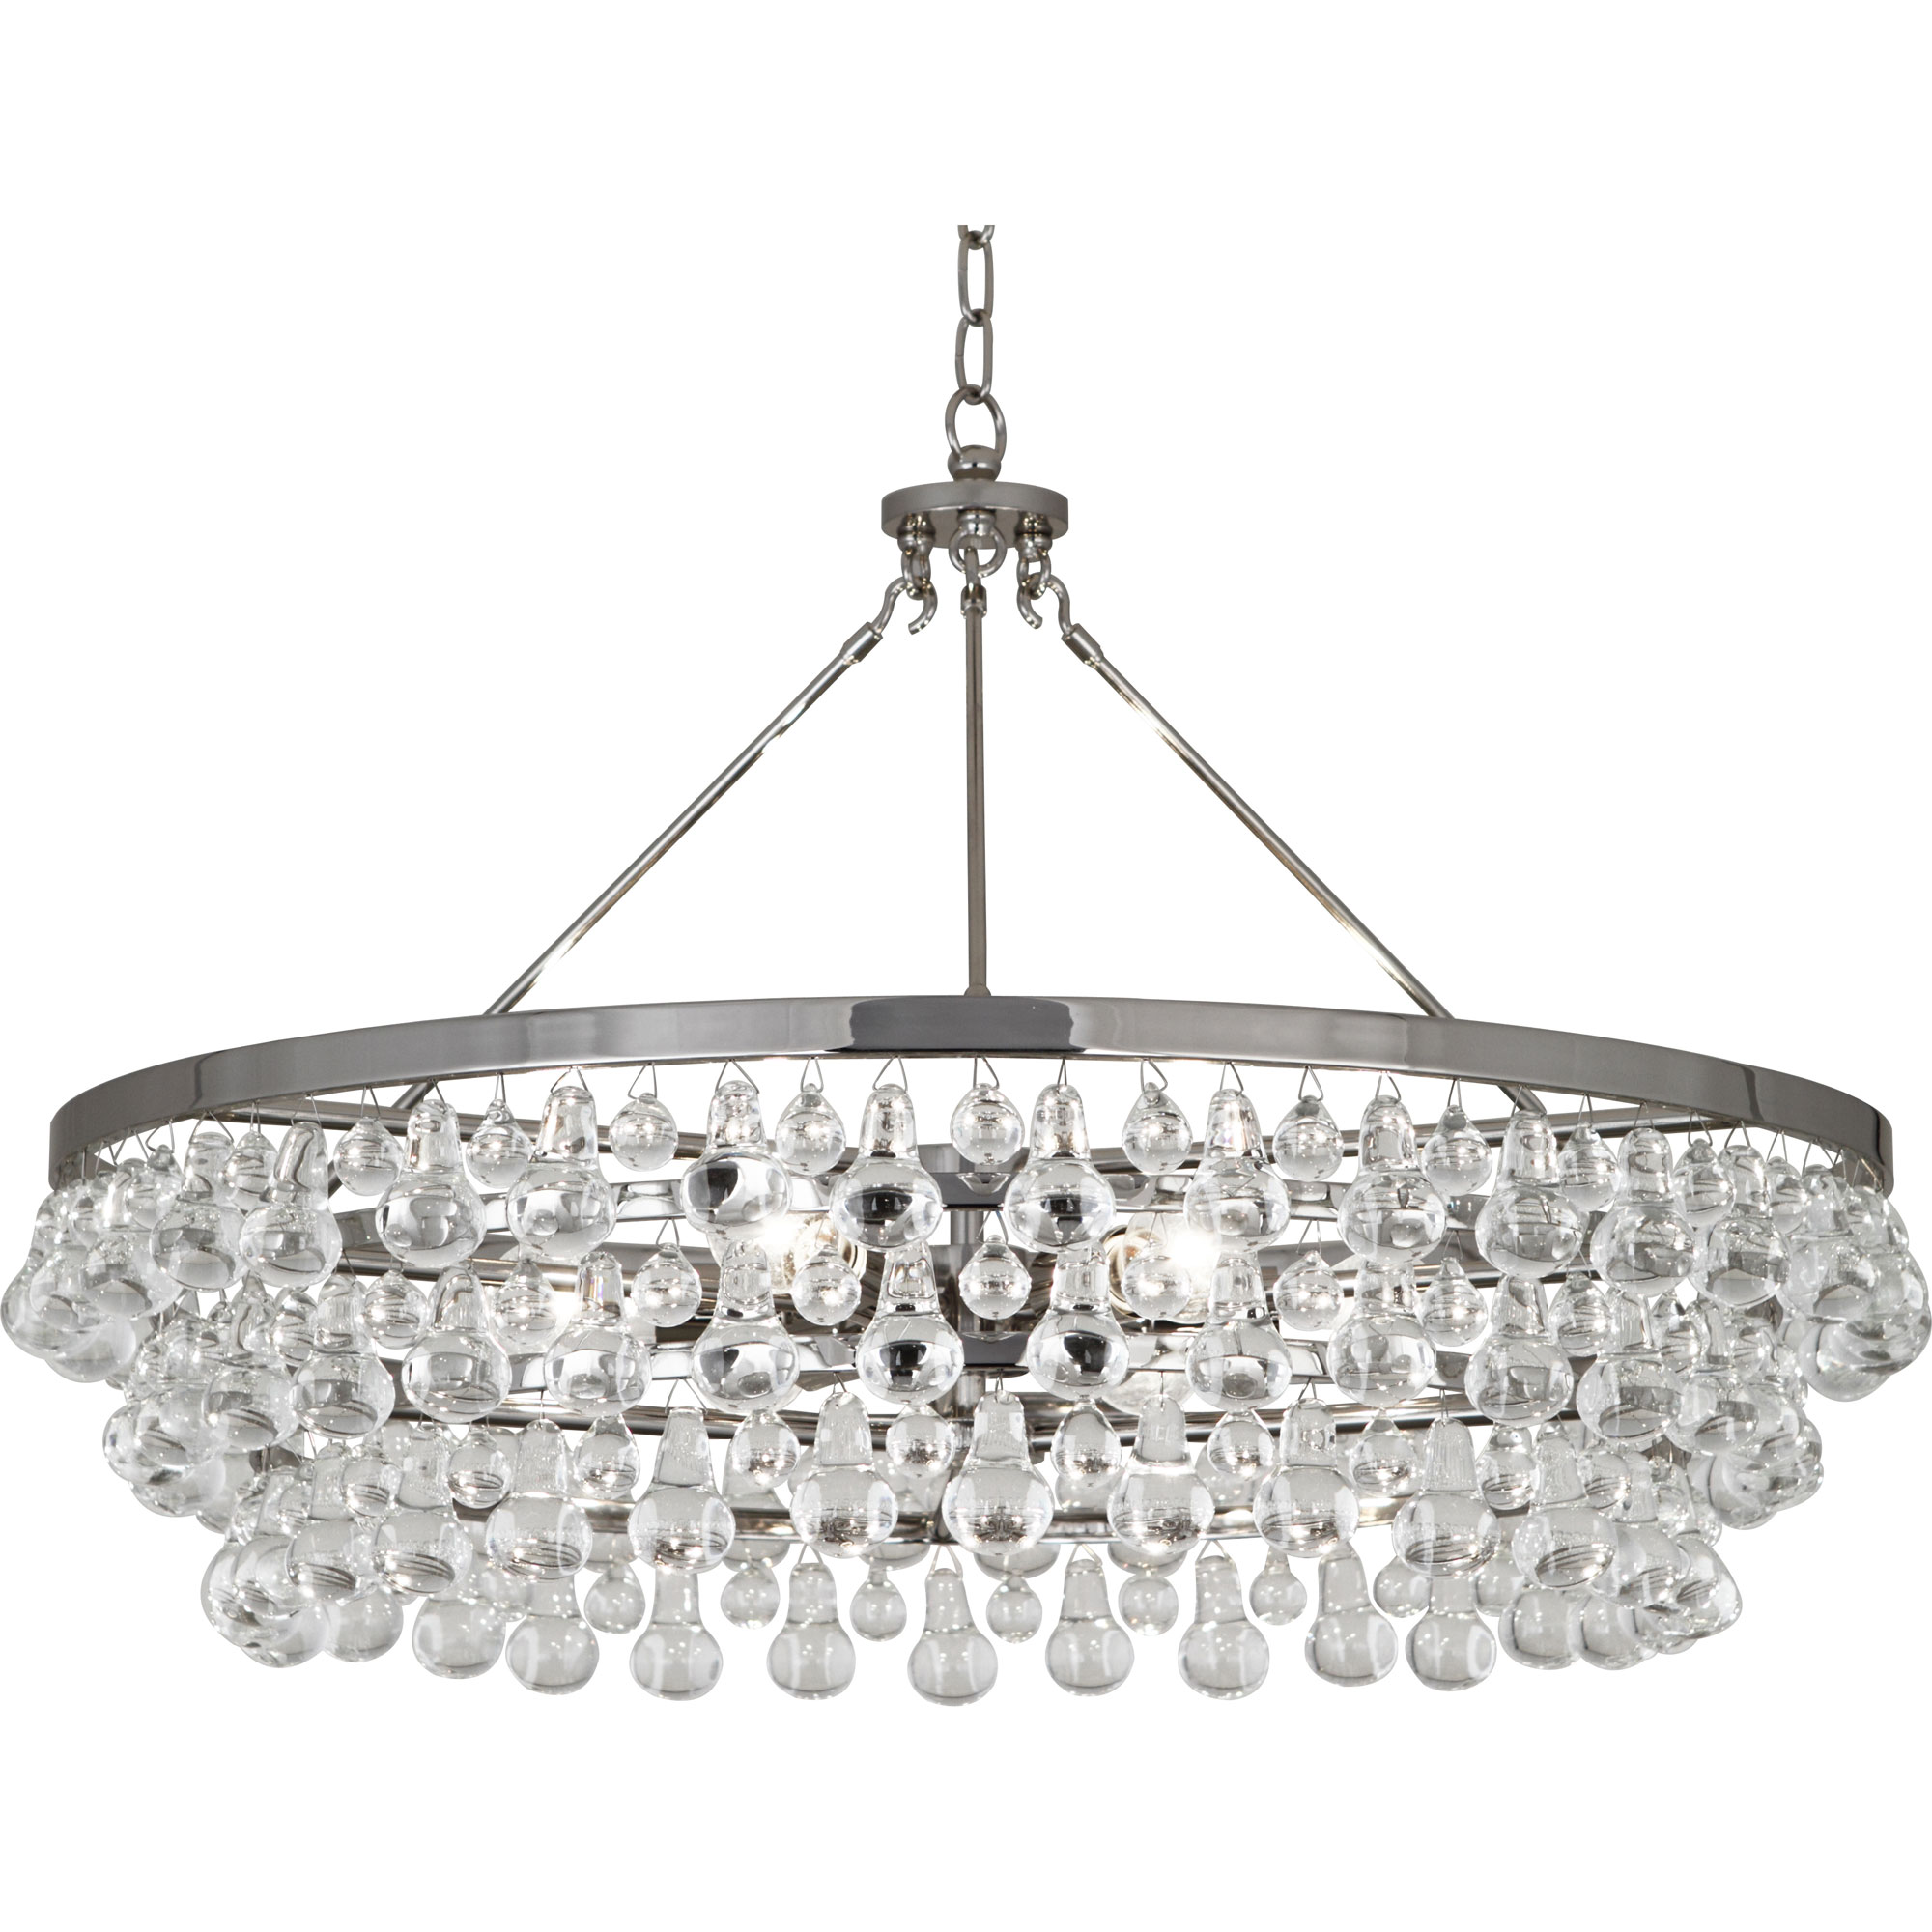 Bling Large Chandelier by Robert Abbey | RA-S1004